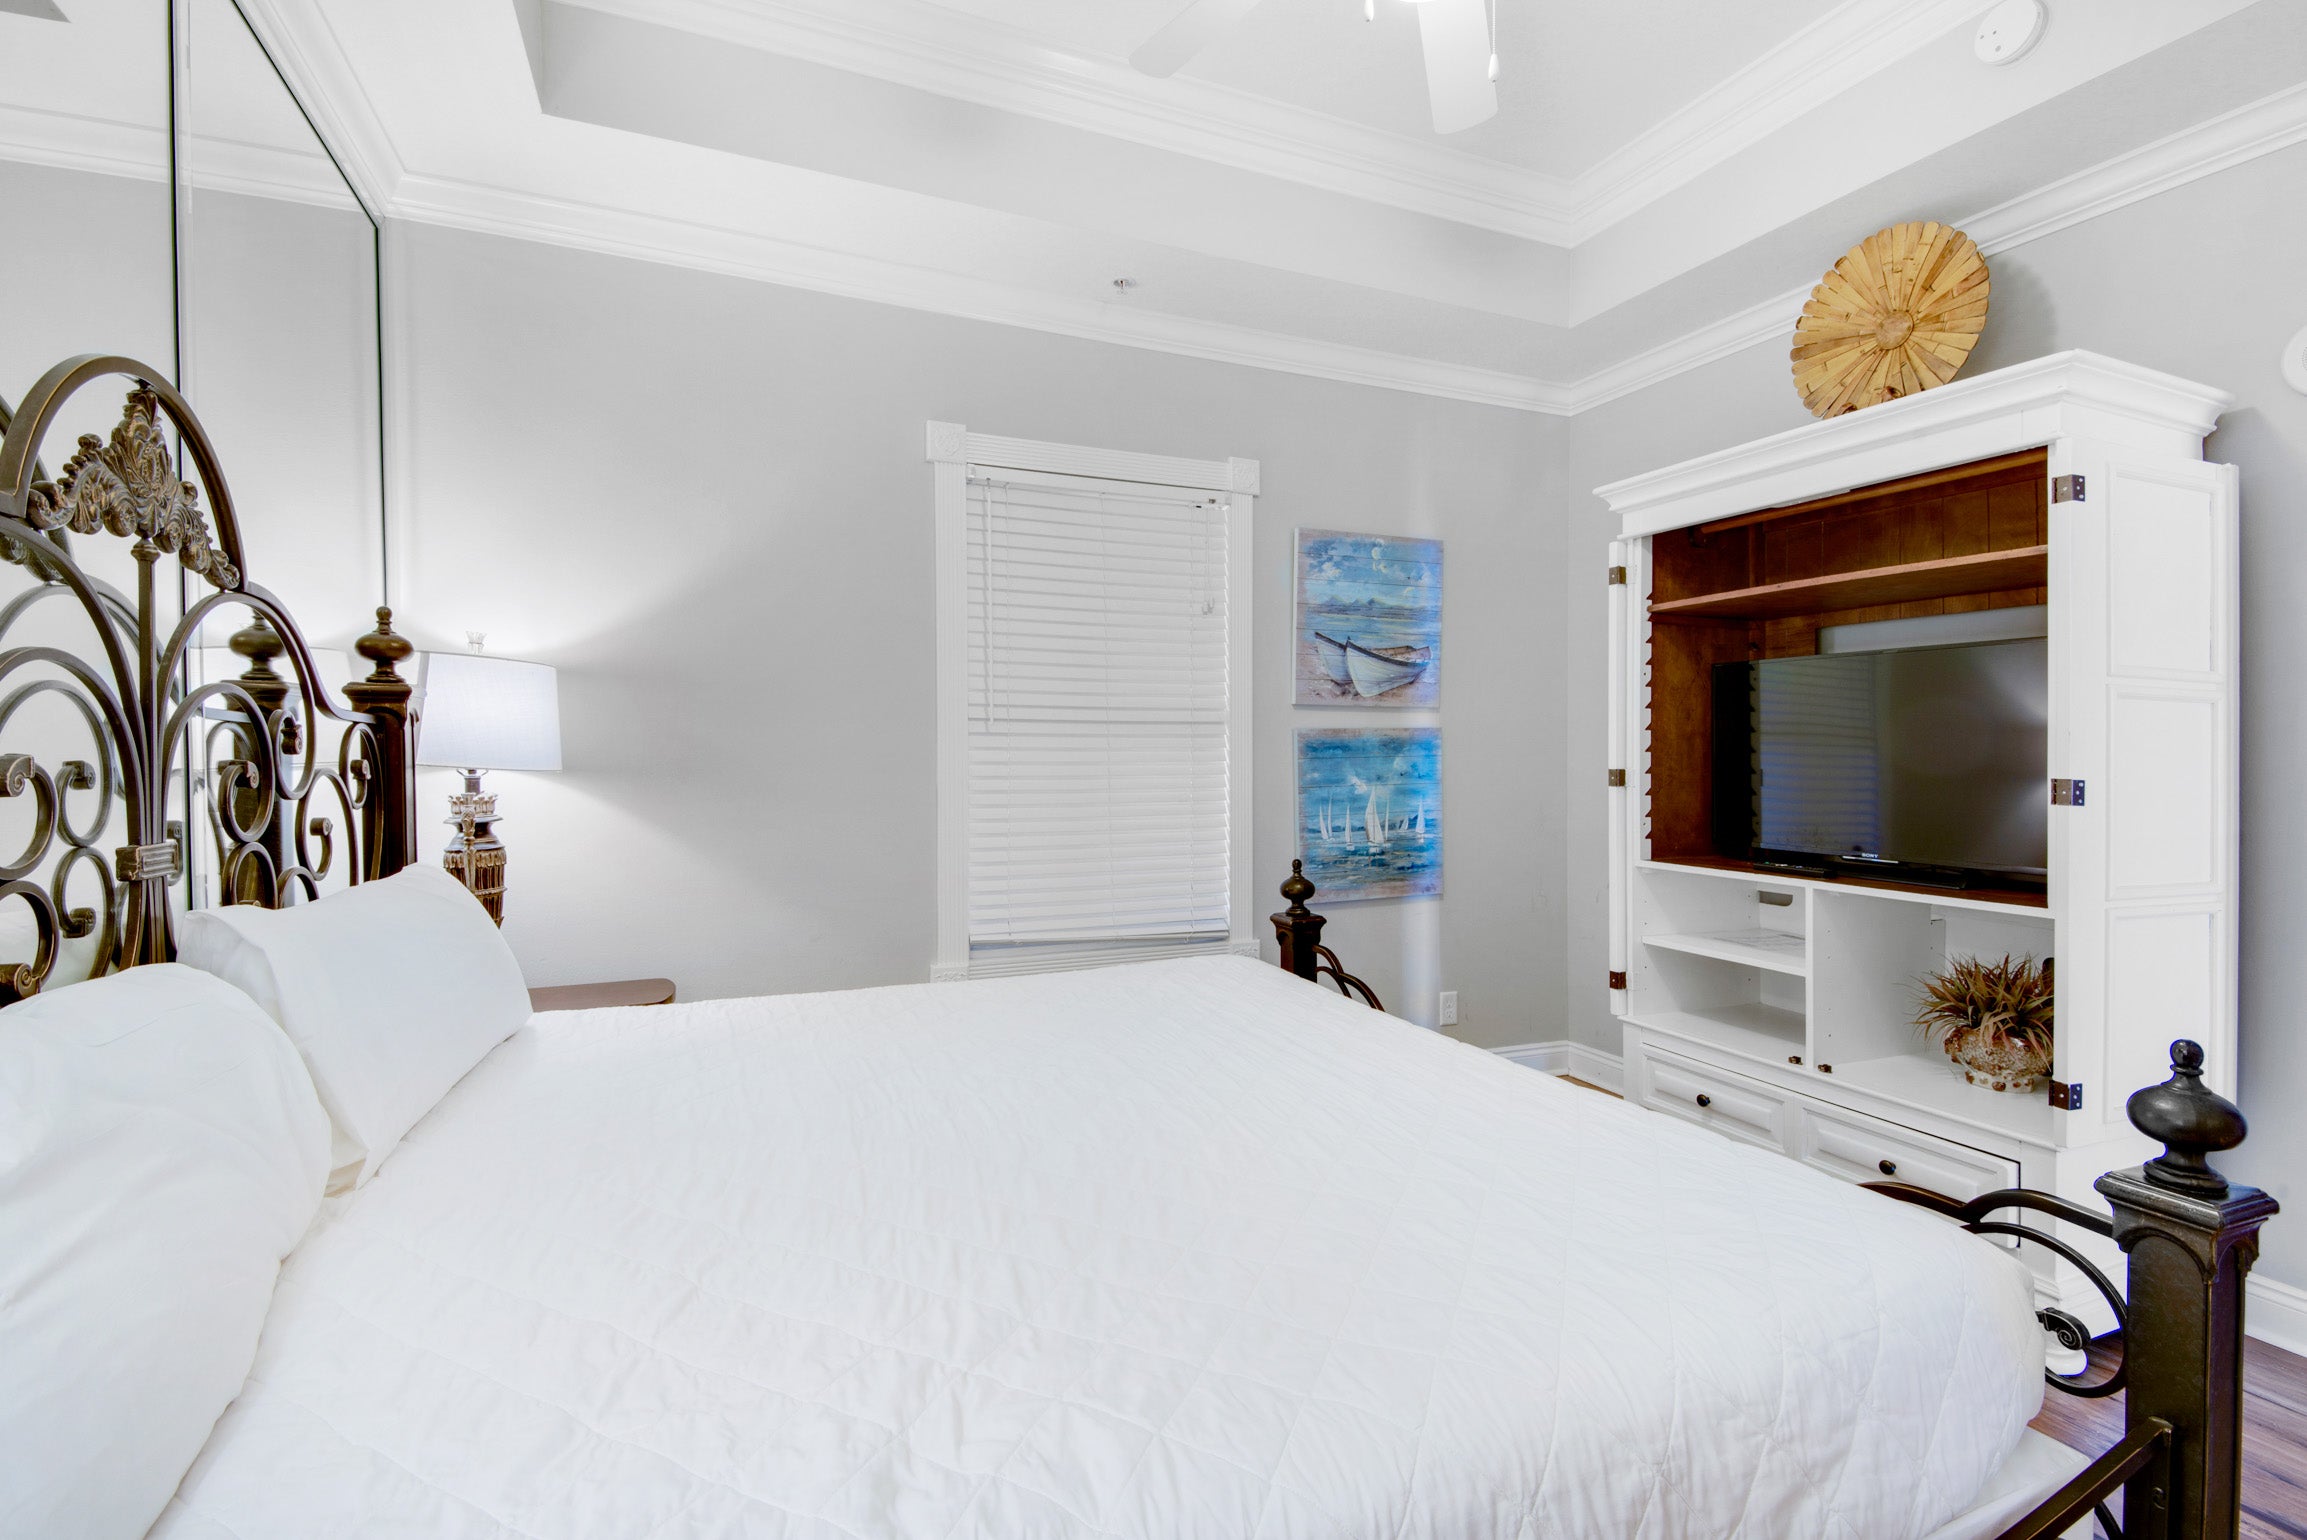 Master bedroom with flat screen TV